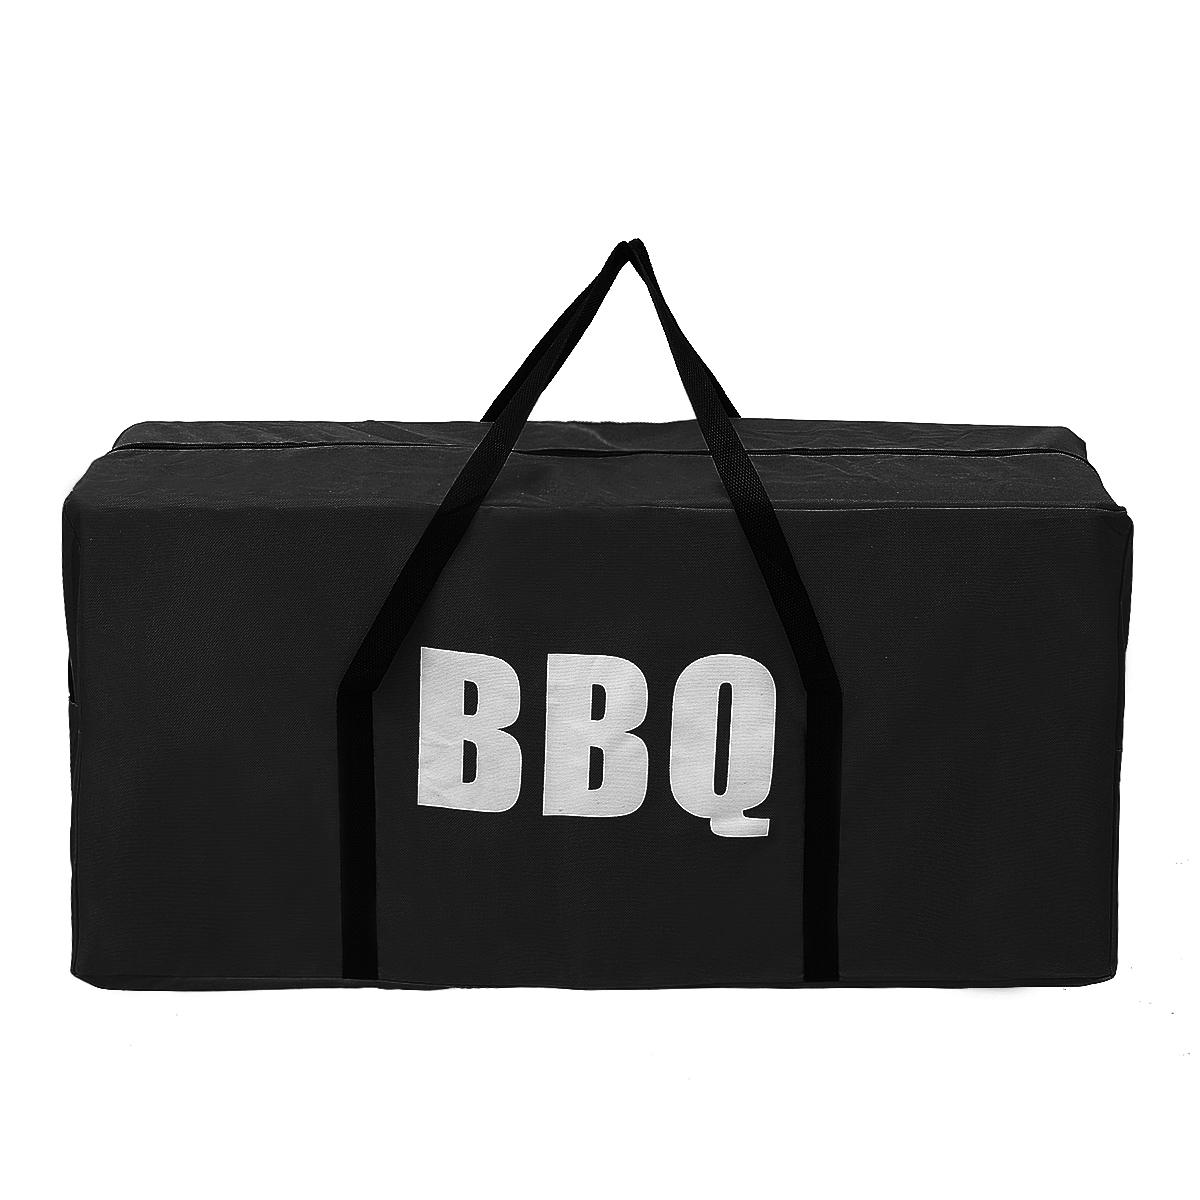 Outdoor Portable BBQ Grill Bag Oxford Camping Picknick Koken Carry Pouch